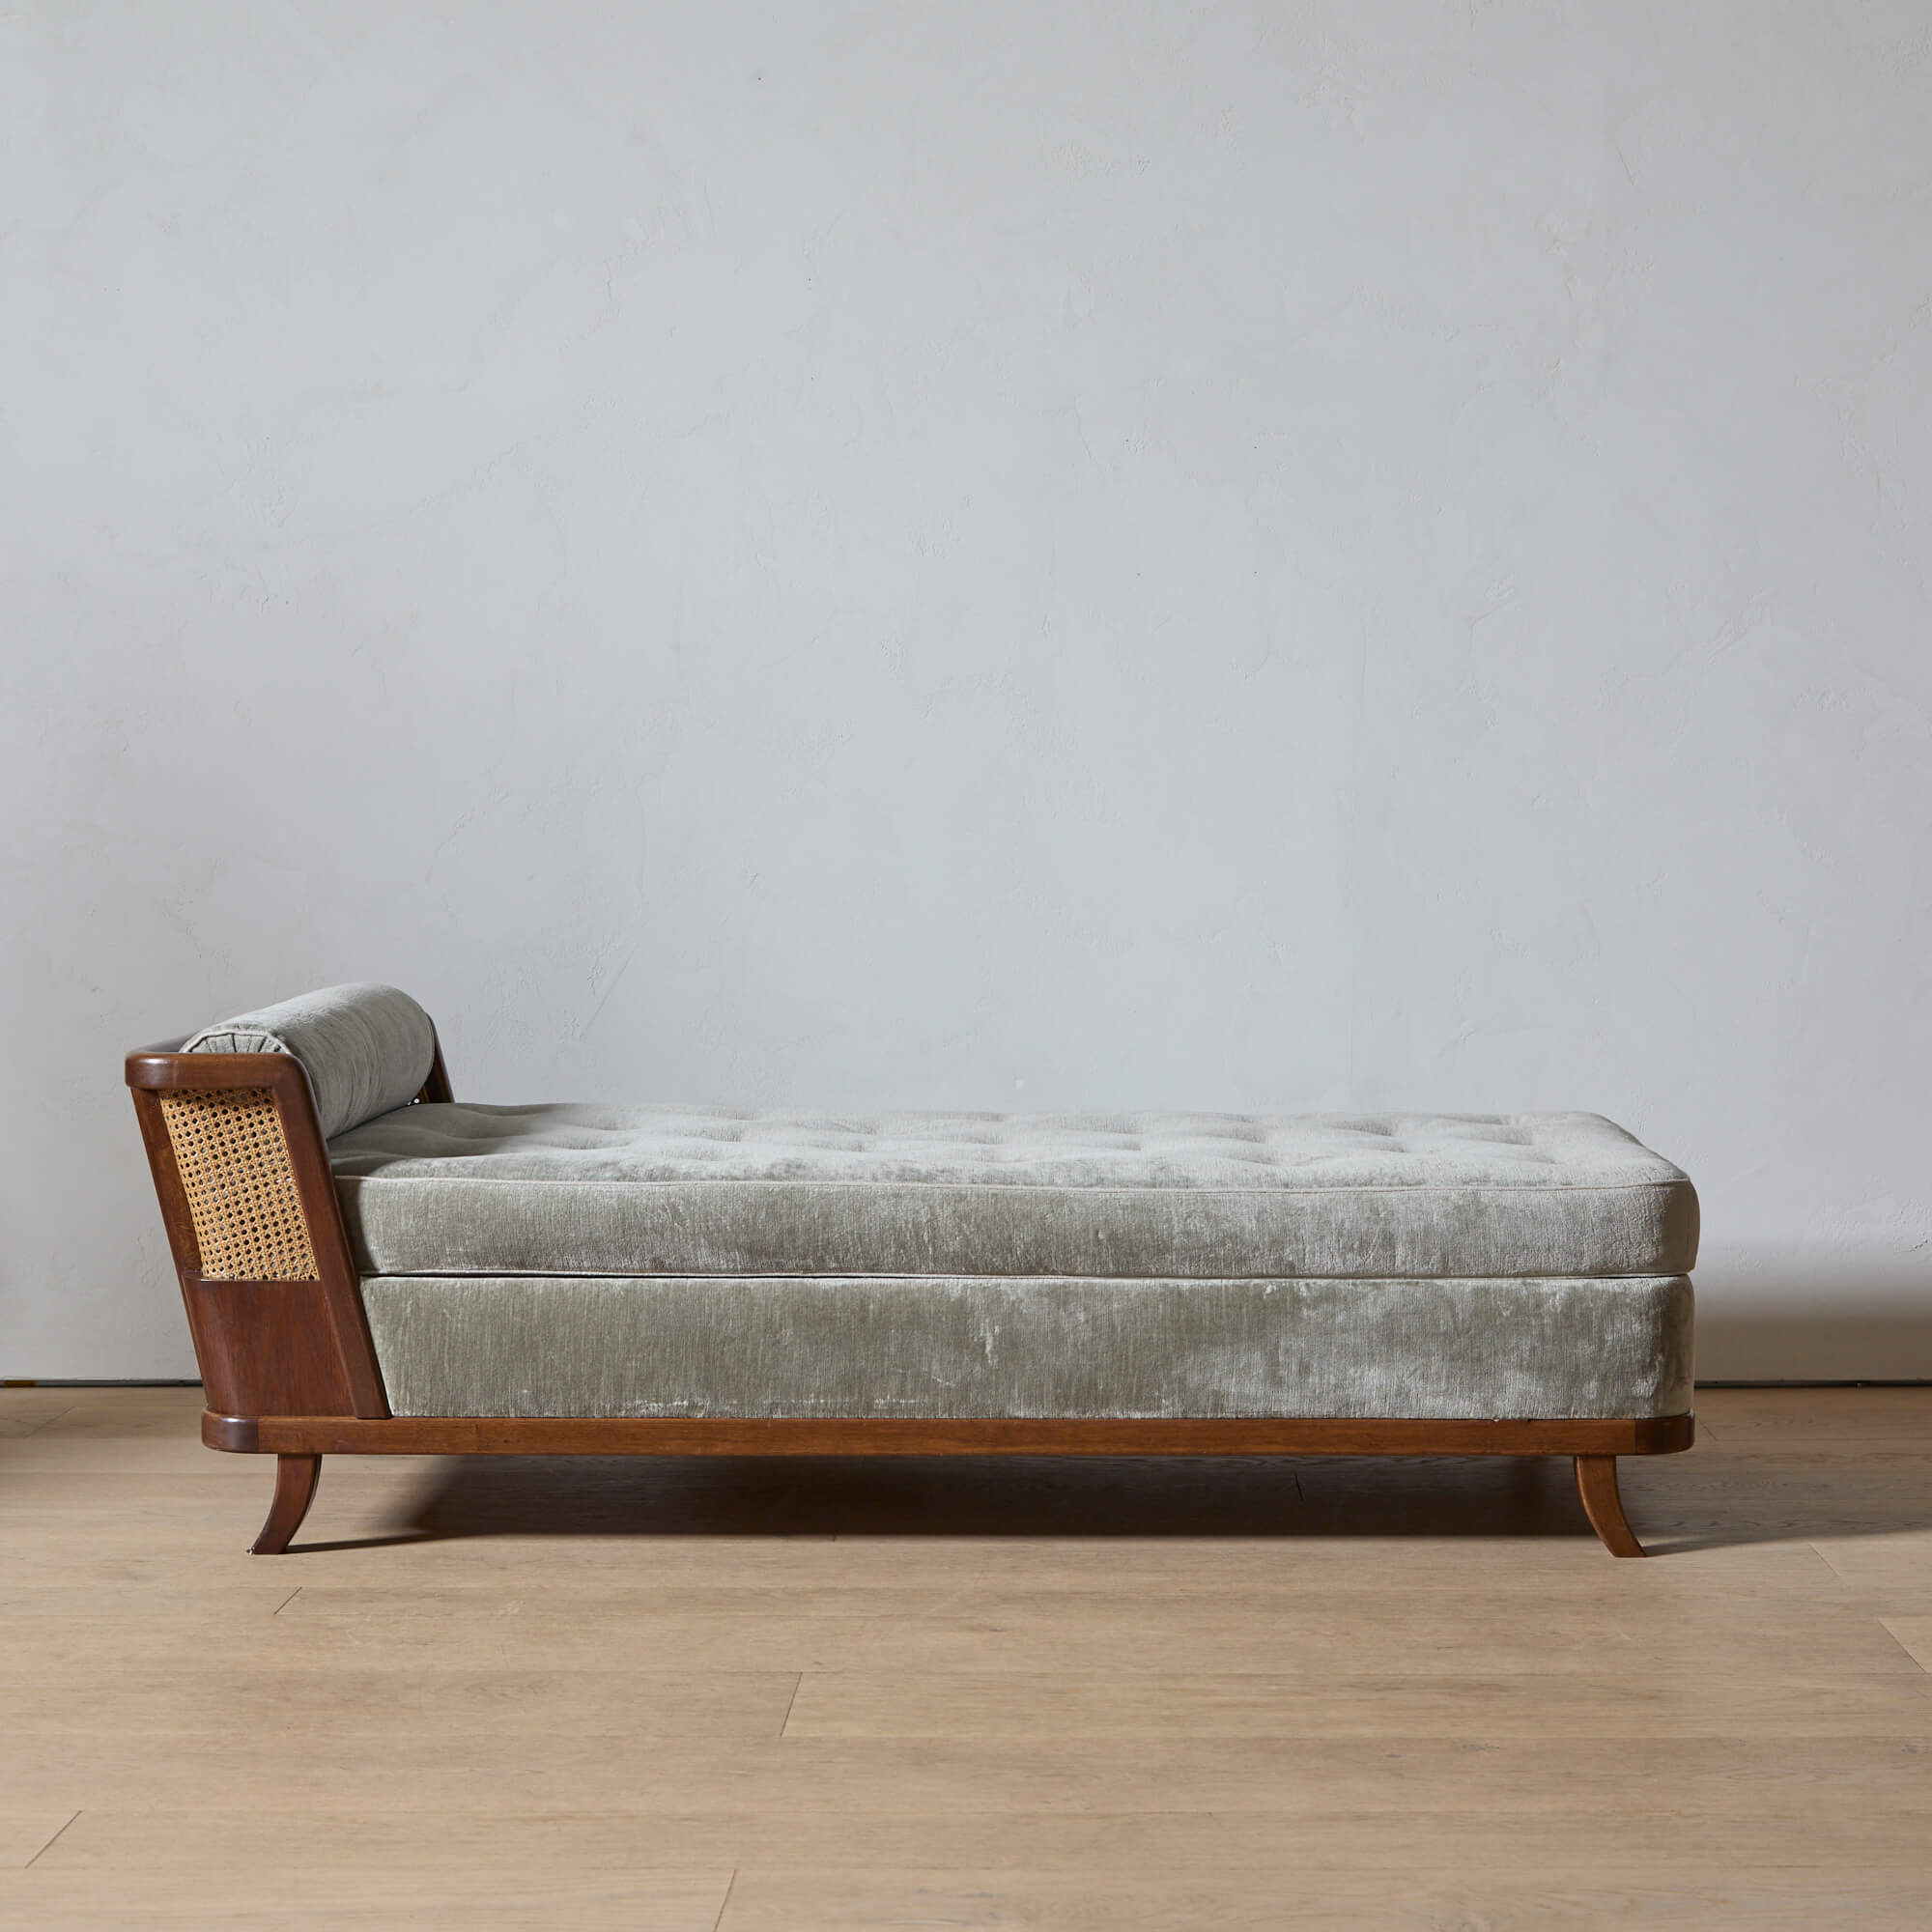 Swedish Moderne Mahogany and Cane Daybed